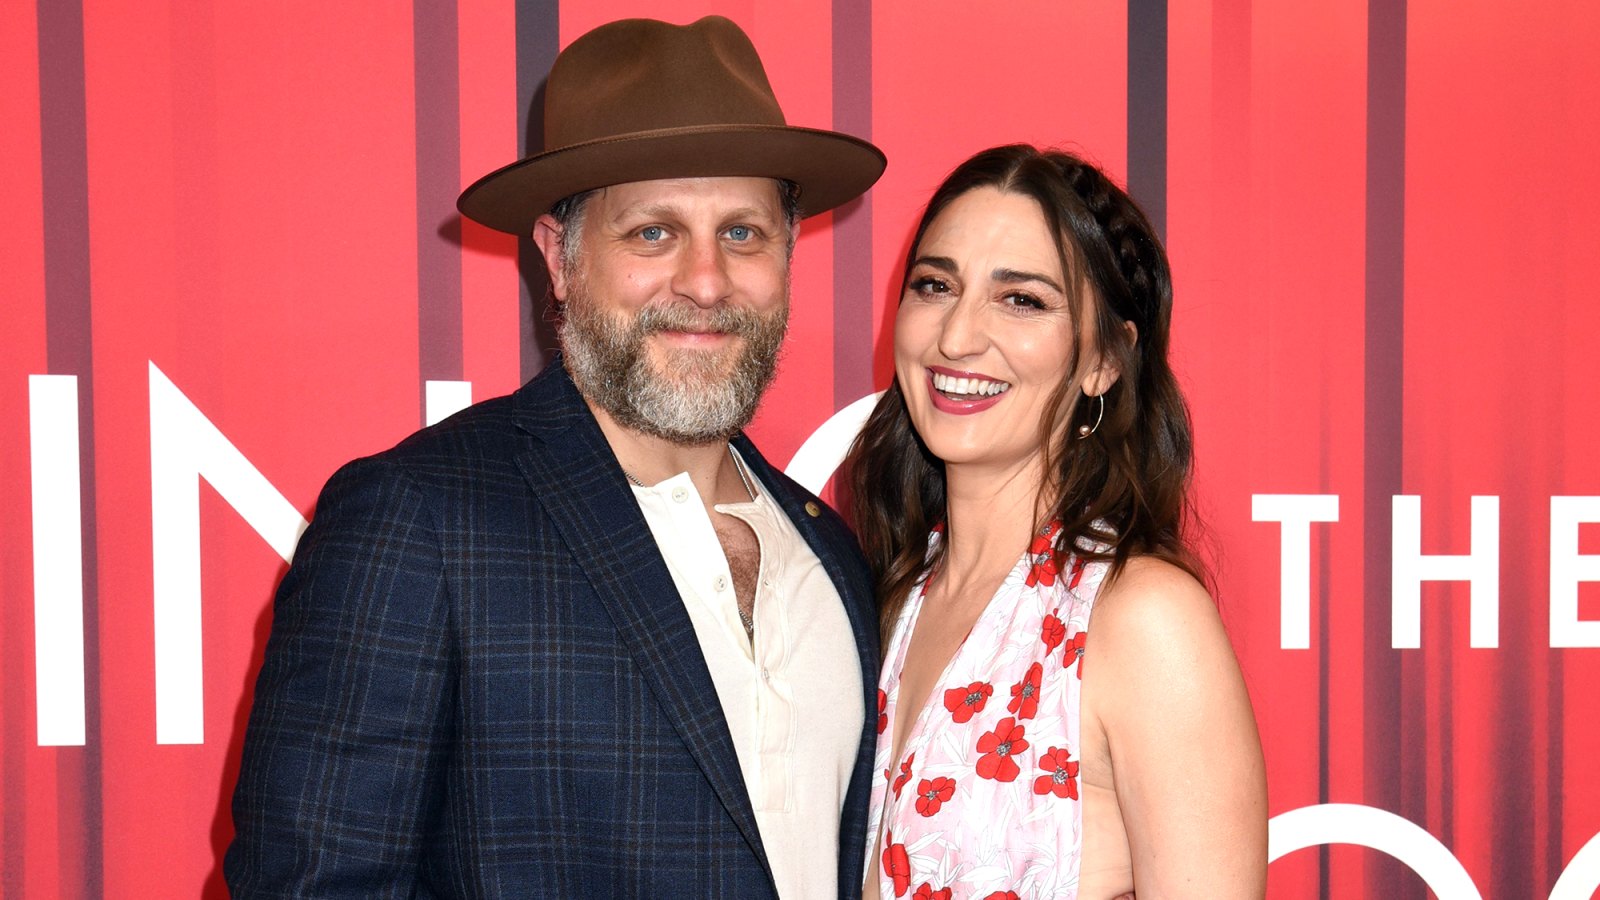 Sara Bareilles and Boyfriend Joe Tippett Are Engaged: ‘New Year’s Resolution’ Is to Get Married